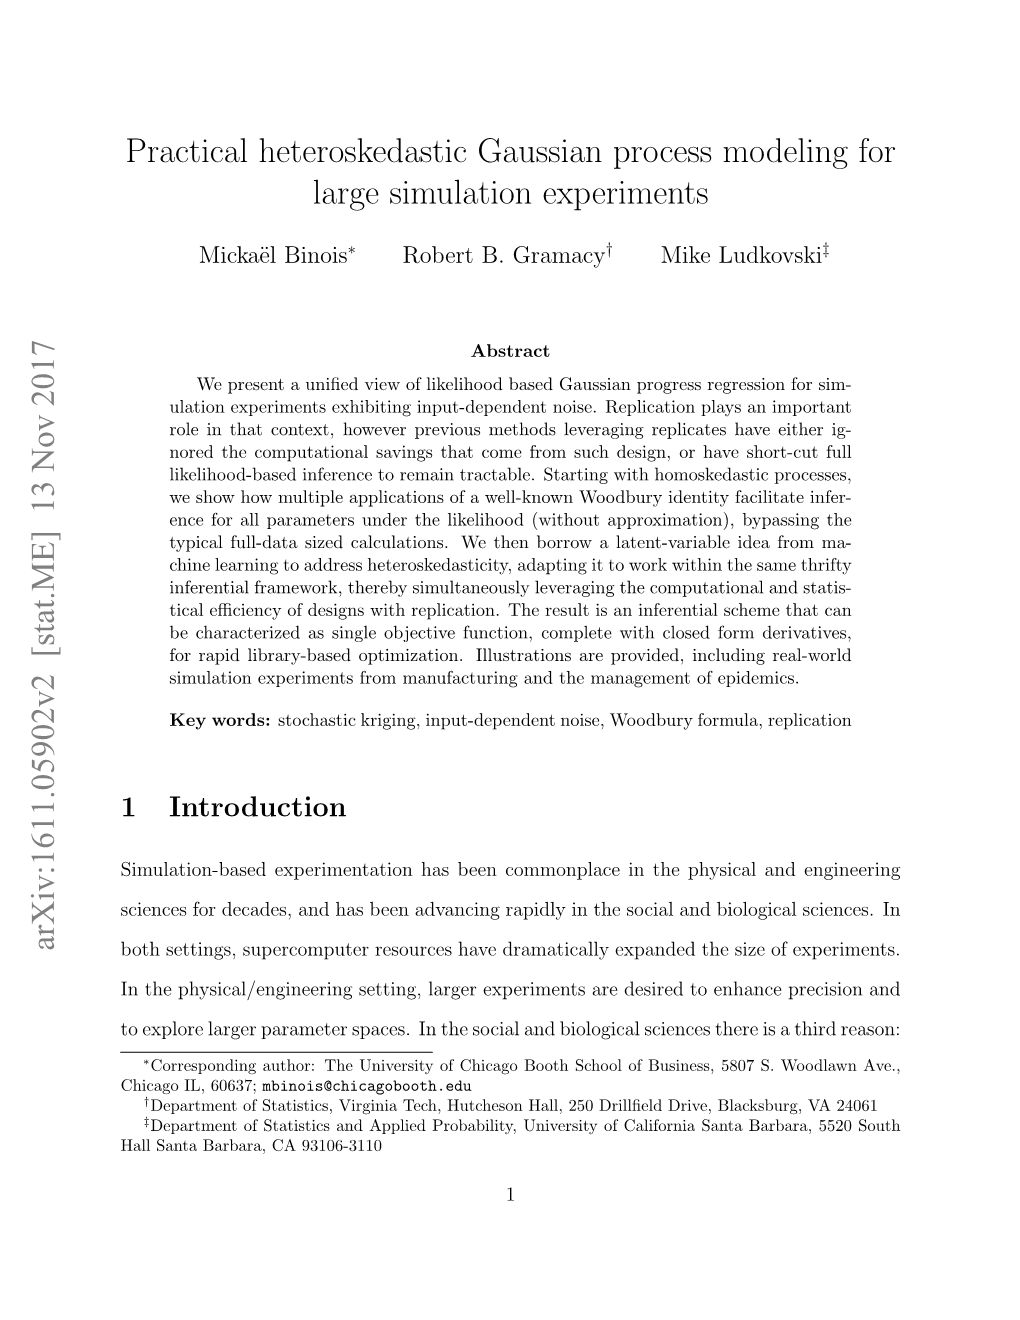 Practical Heteroskedastic Gaussian Process Modeling for Large Simulation Experiments